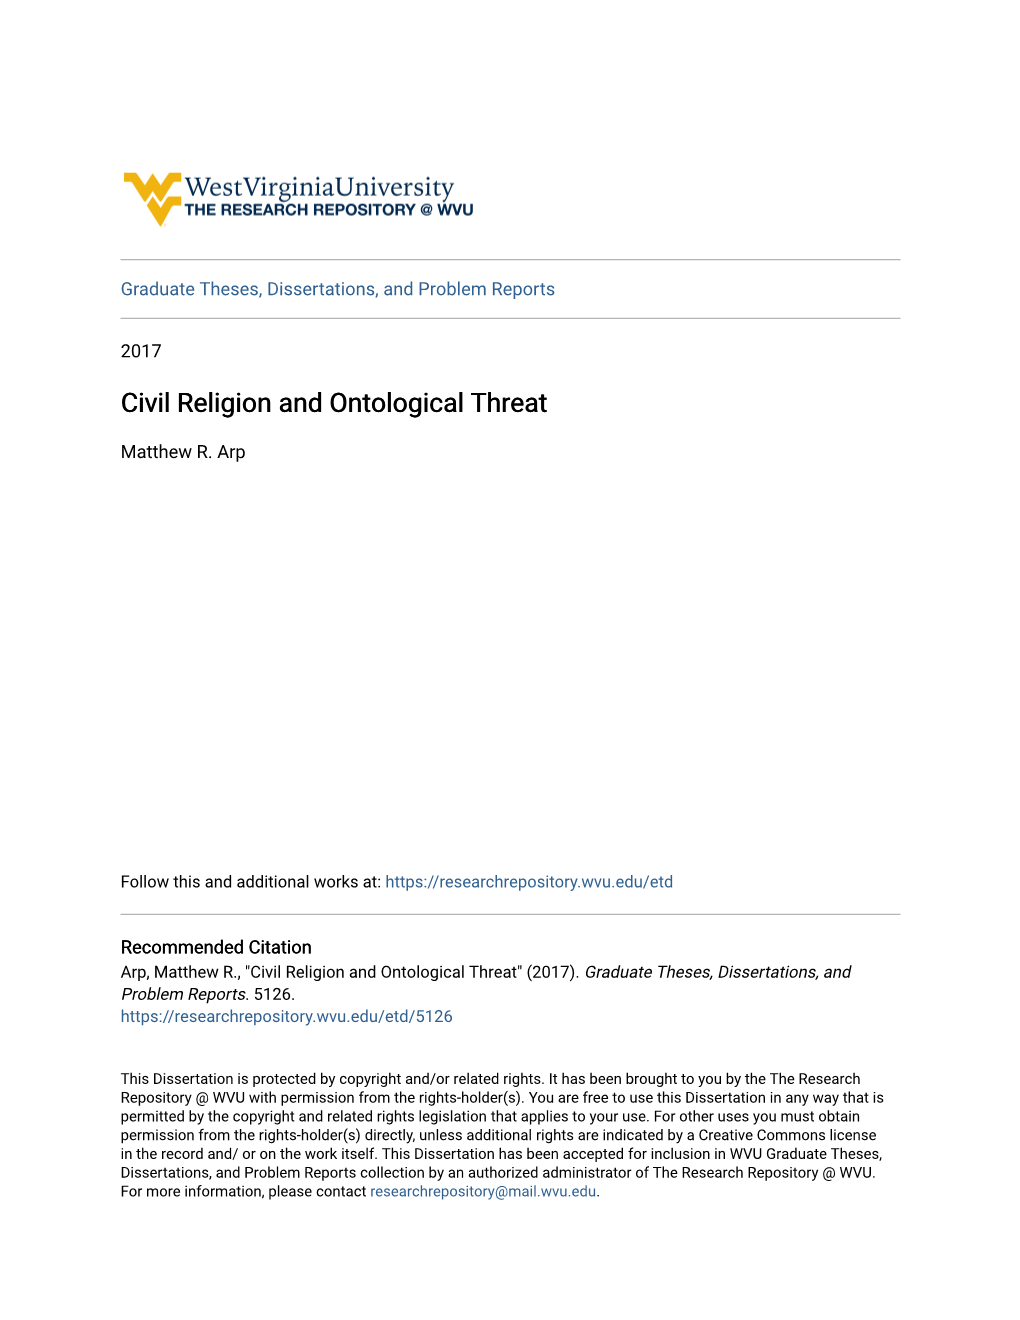 Civil Religion and Ontological Threat